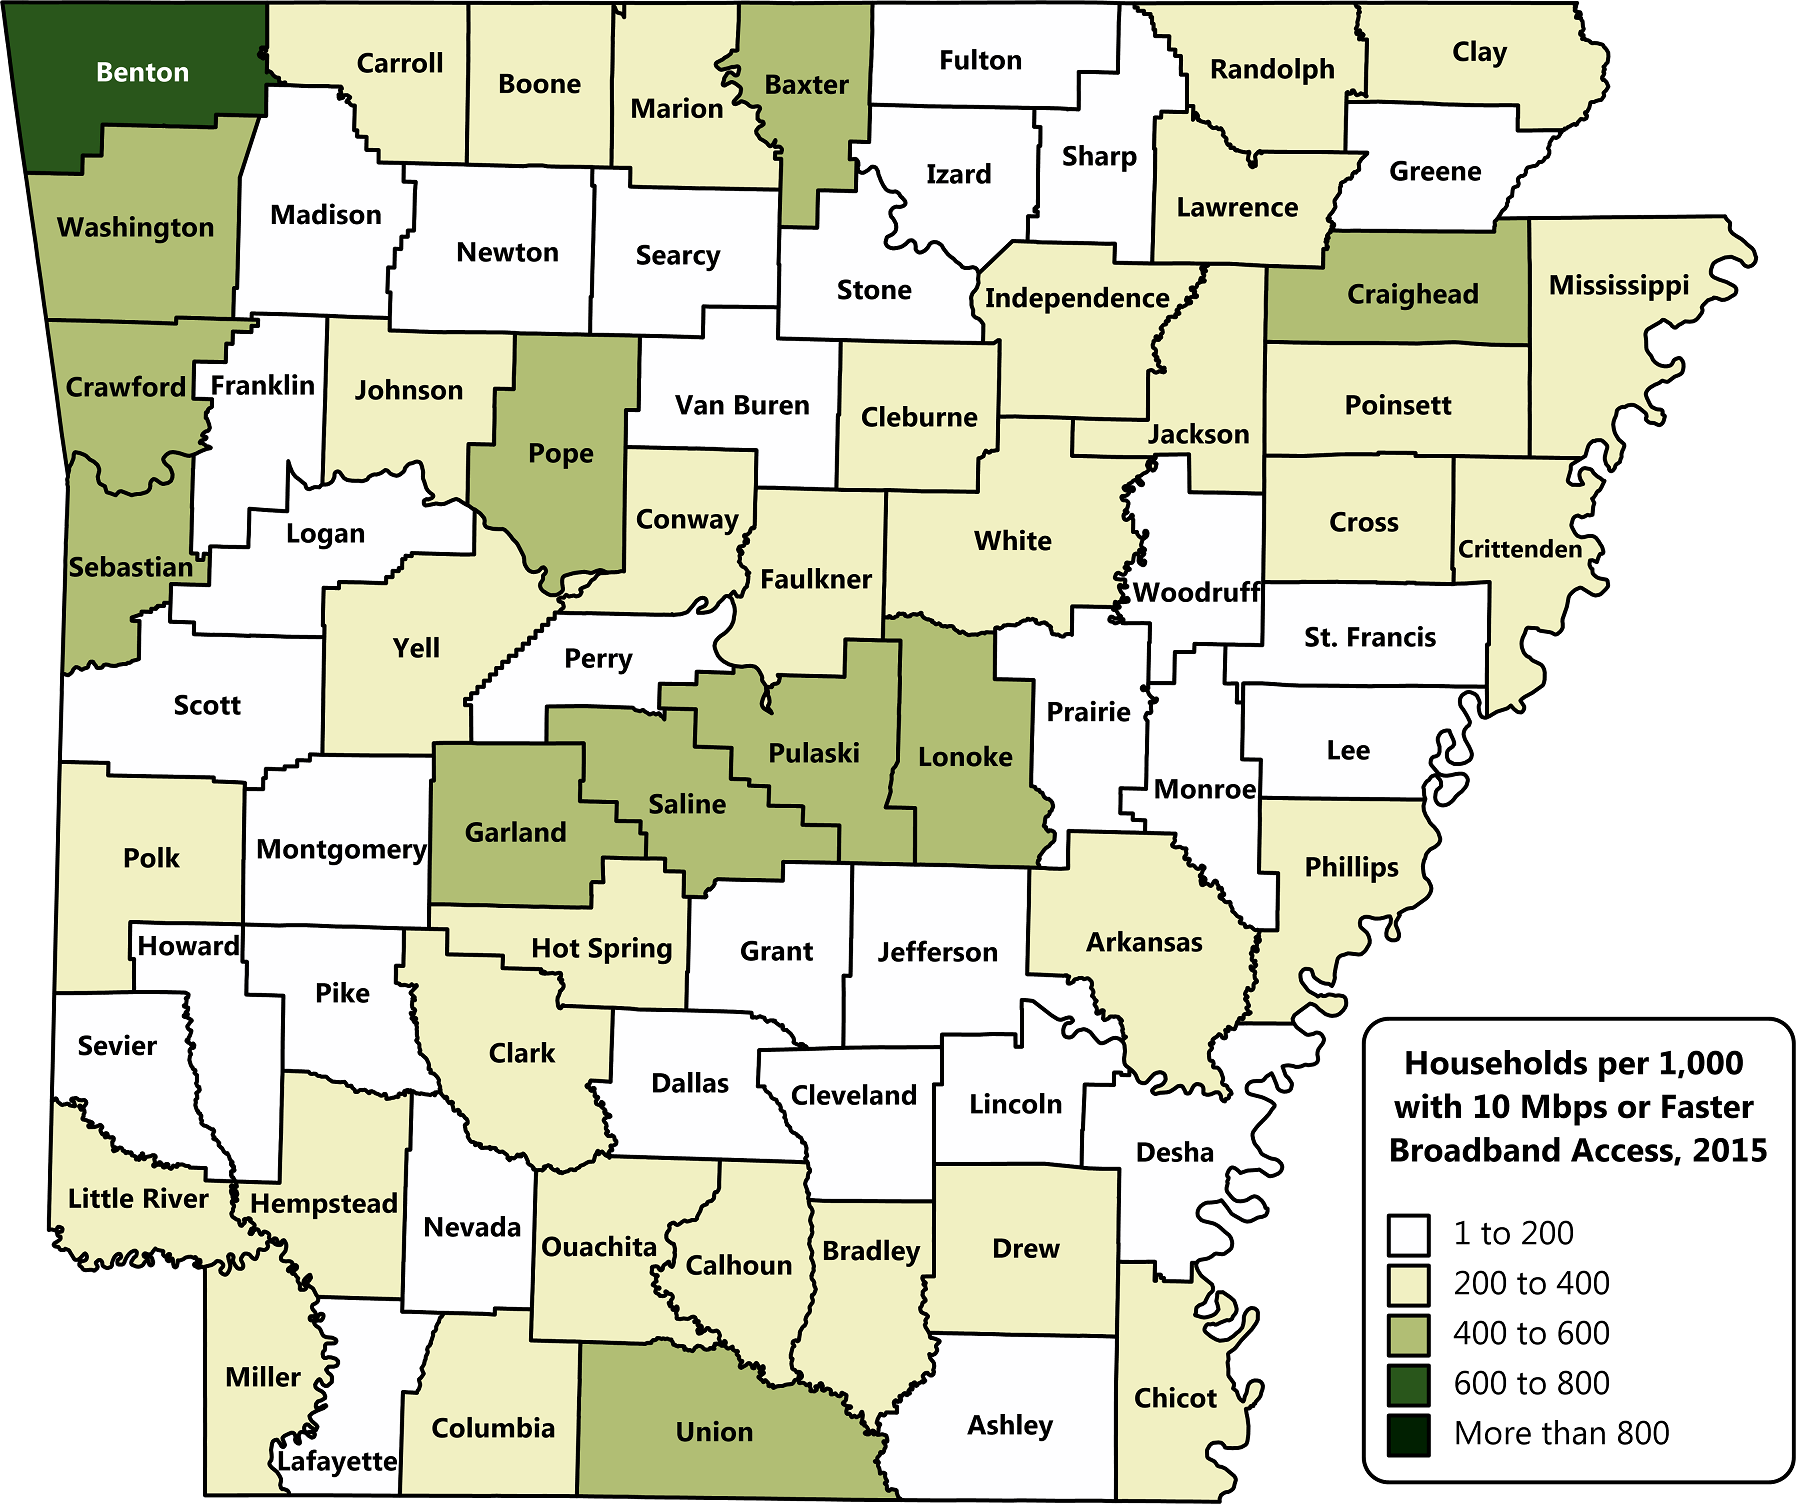 Arkansas county map chart showing households per 1,000 with 10+ Mbps internet access in 2015. Benton County was the only county in which 600-800 households per 1,000 had internet speeds of 10 Mbps or greater. The majority of counties had little to no access.